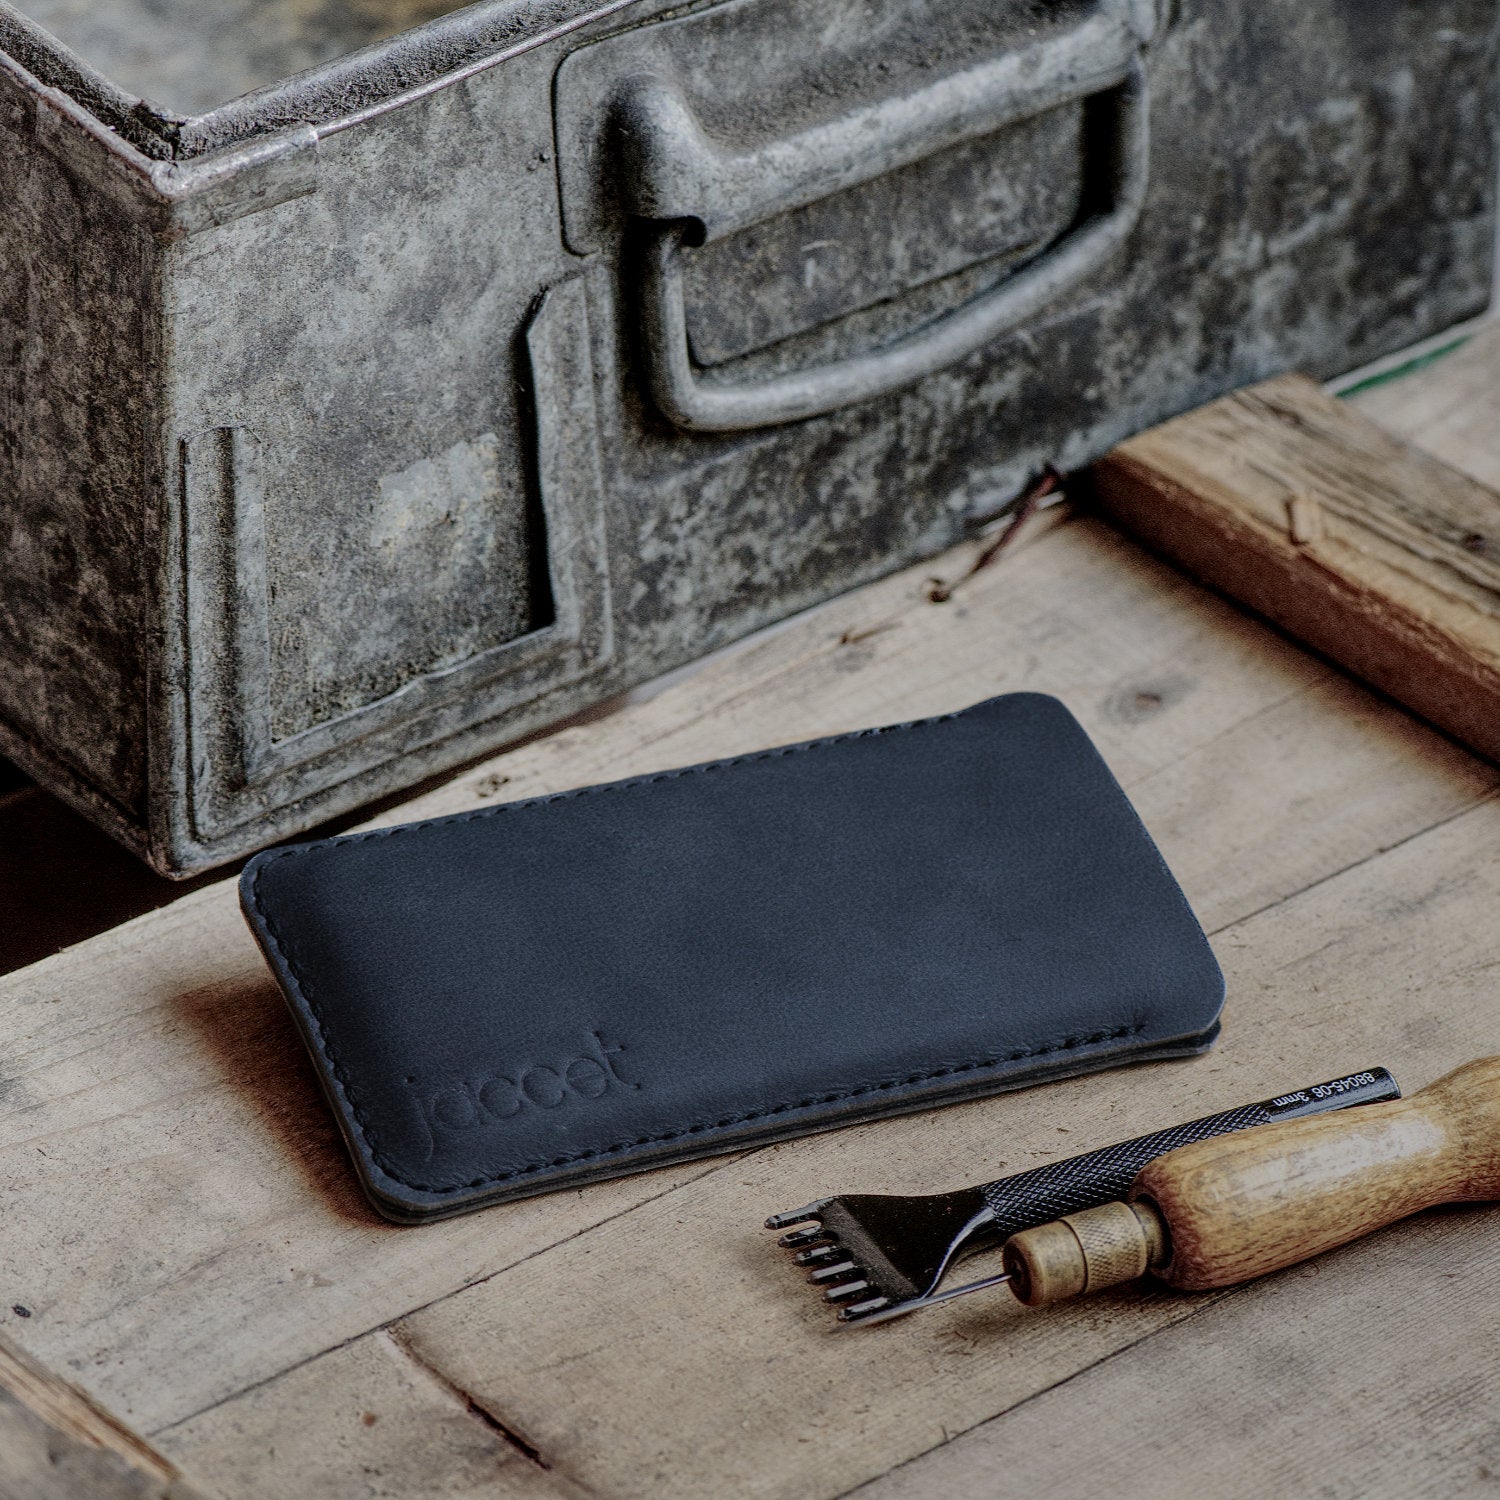 JACCET leather Xiaomi sleeve - anthracite/black leather with black wool felt. 100% Handmade